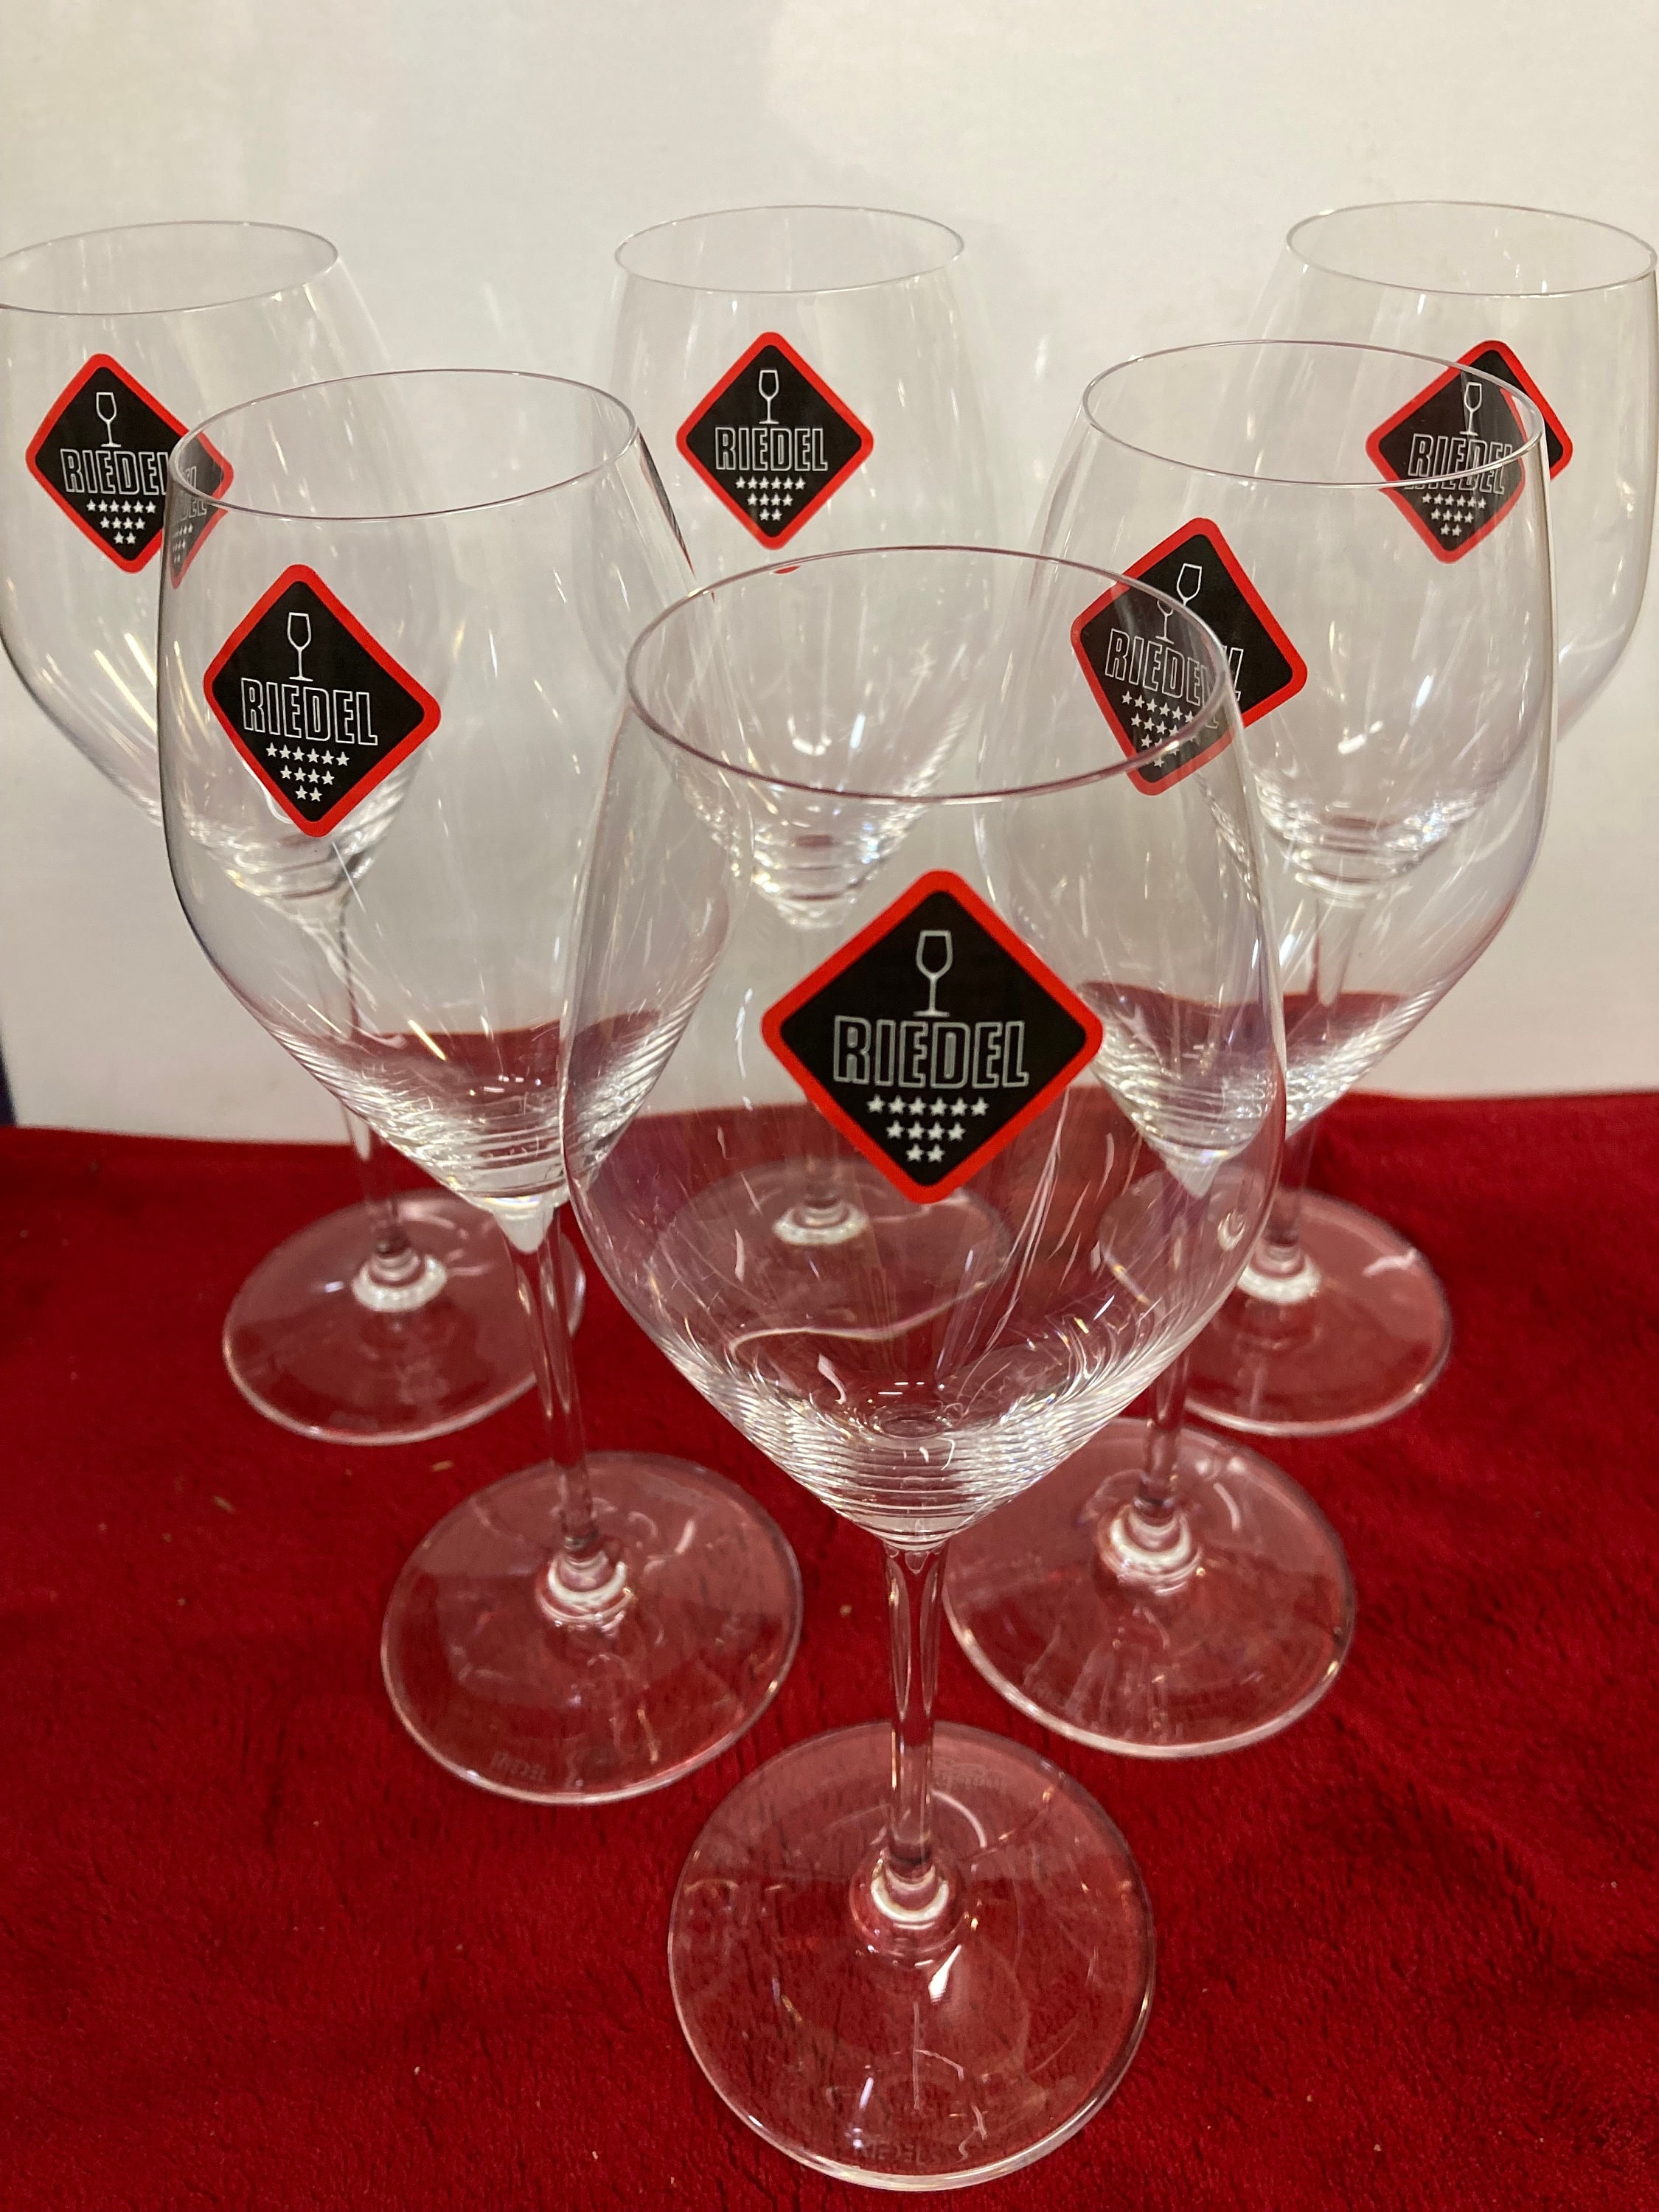 Latest Riedel Handblown Champagne/Wine Flutes w/Riedel Label/Etched on Base